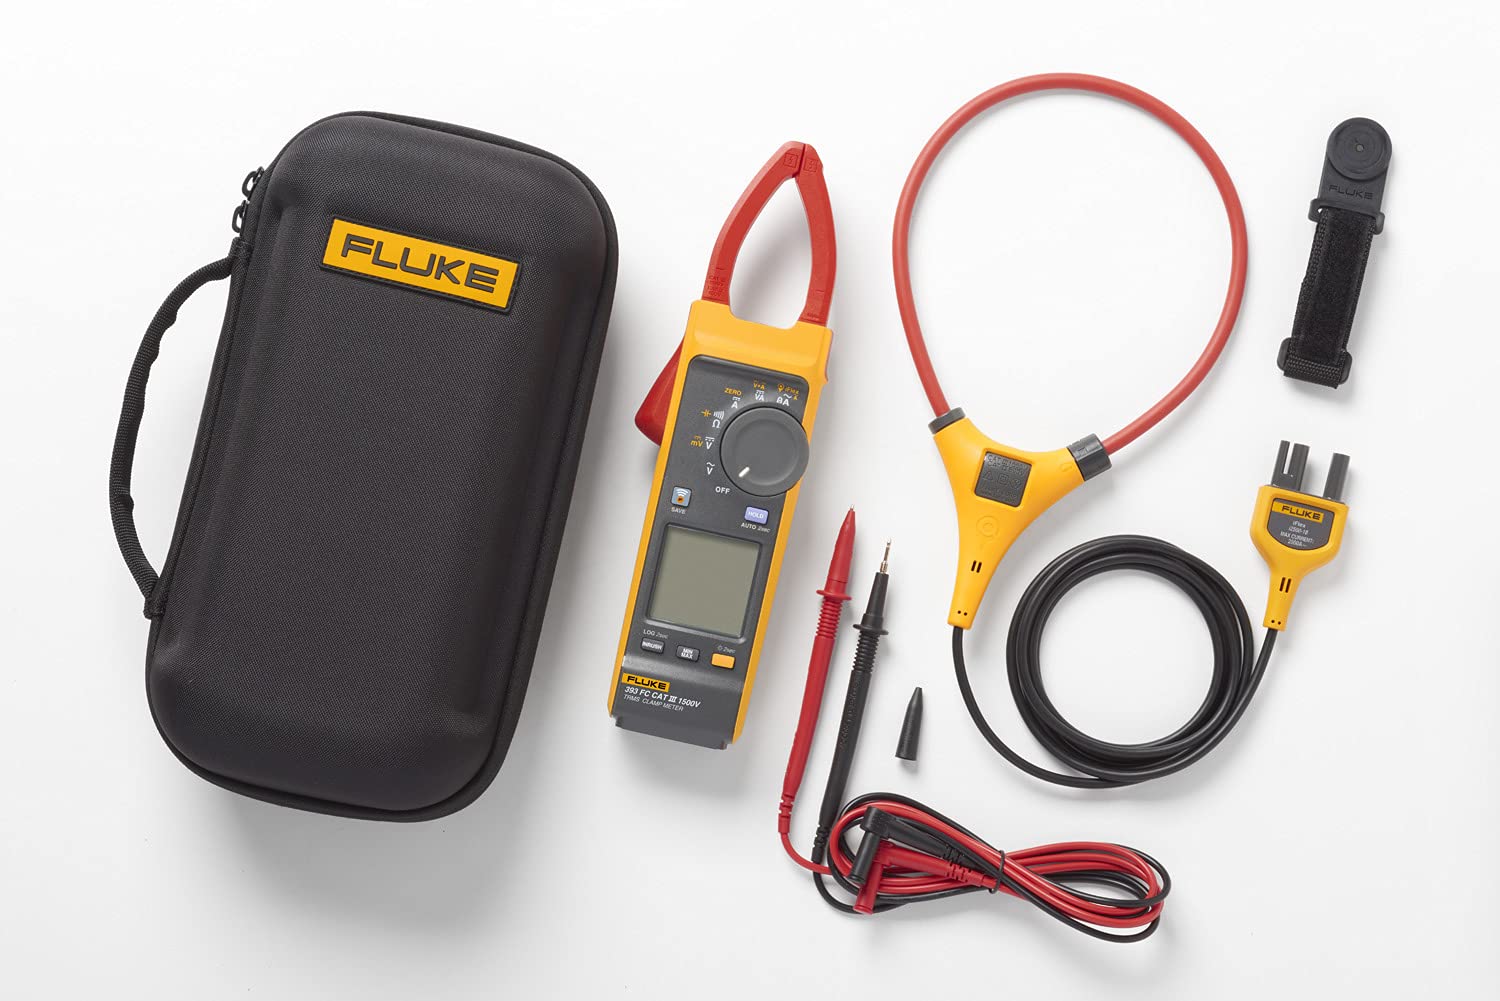 Fluke 393 FC Solar Clamp Meter, CAT III 1500 V, IP54-Rated, DC Power Measurements, Audio Polarity Indicator, Visual Continuity,  Connect Software Enabled,Thin Jaw For Easy Access, Includes iFlex